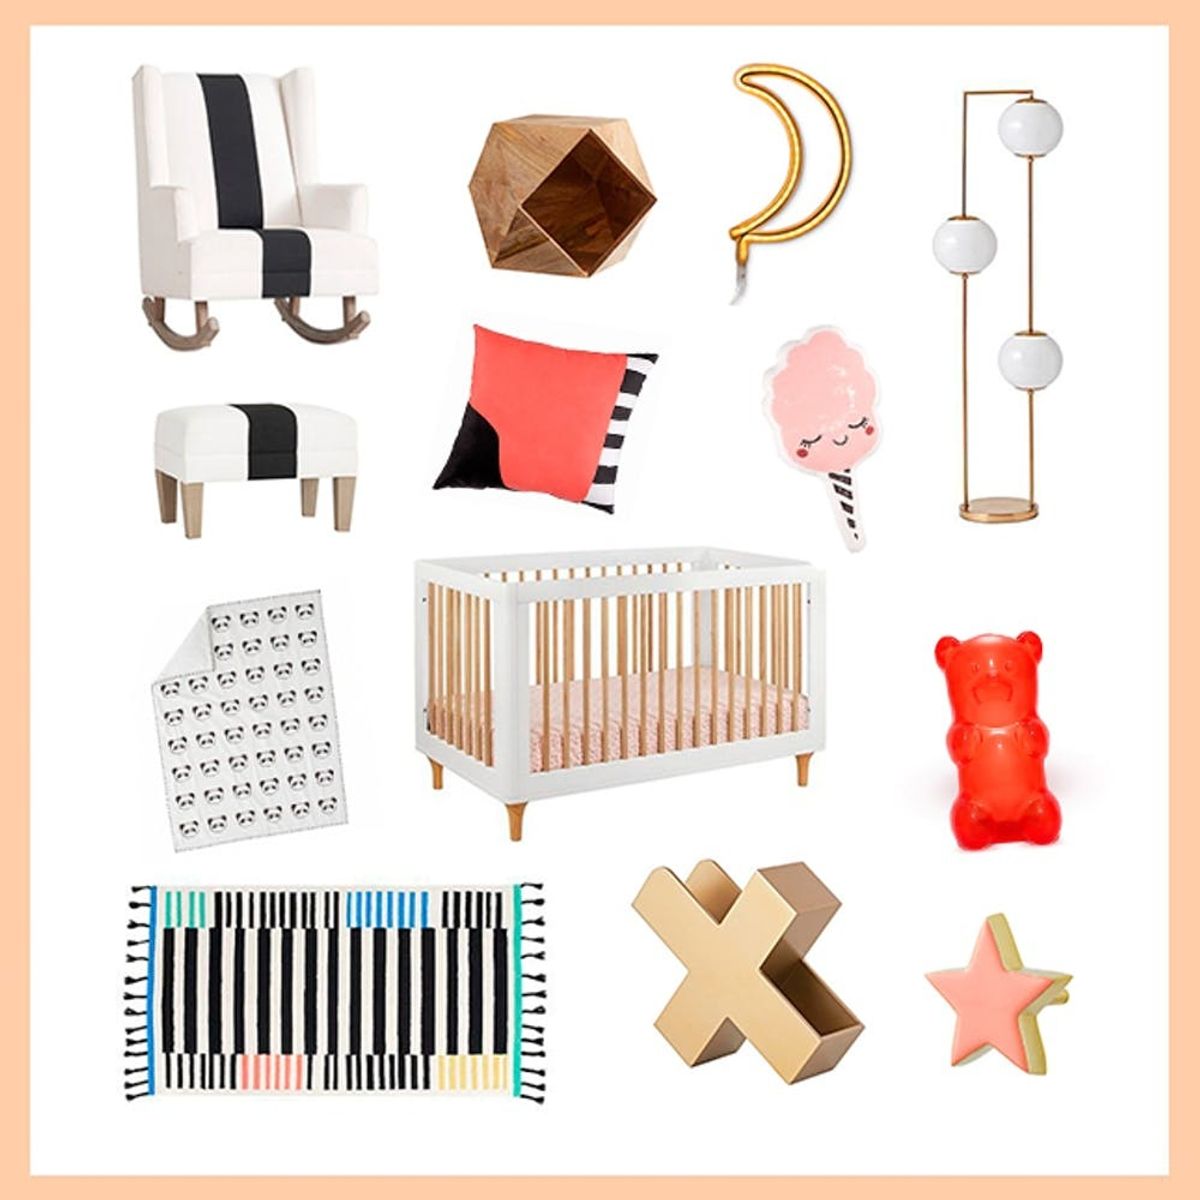 3 Trendy Themes to Pin for Your Babe’s Nursery